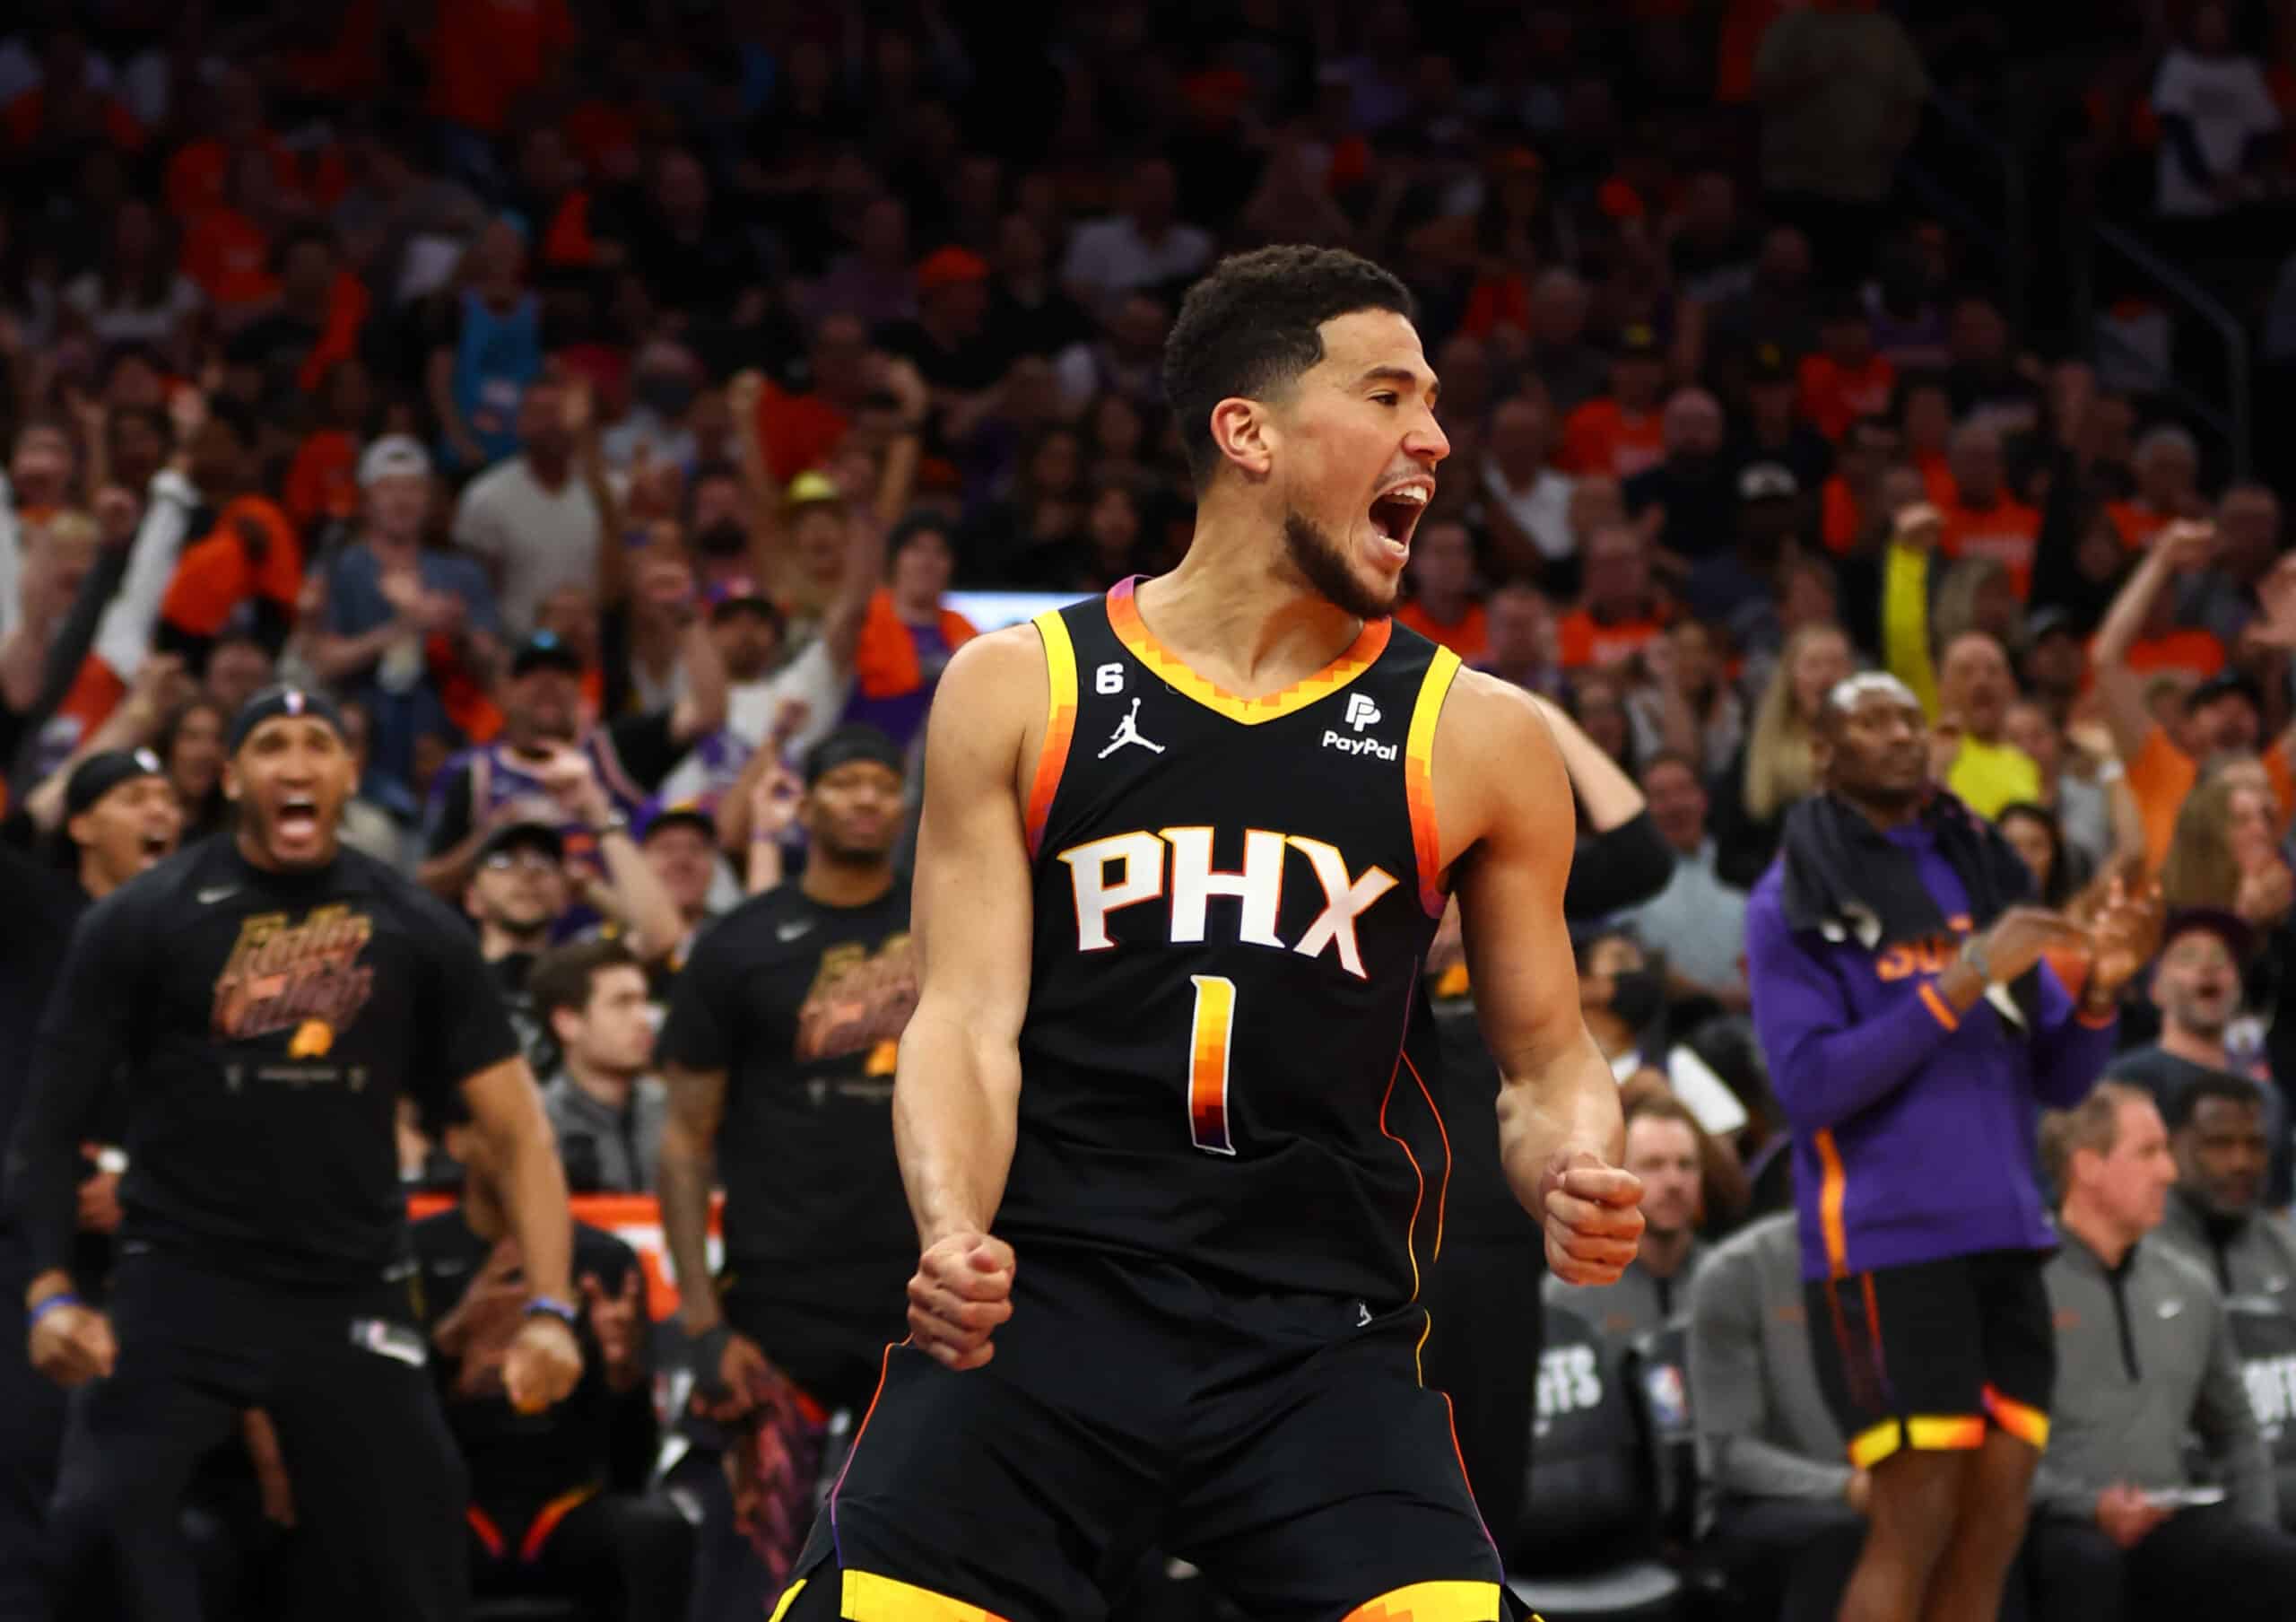 Devin Booker makes Olympic debut in same week as Suns' Finals exit